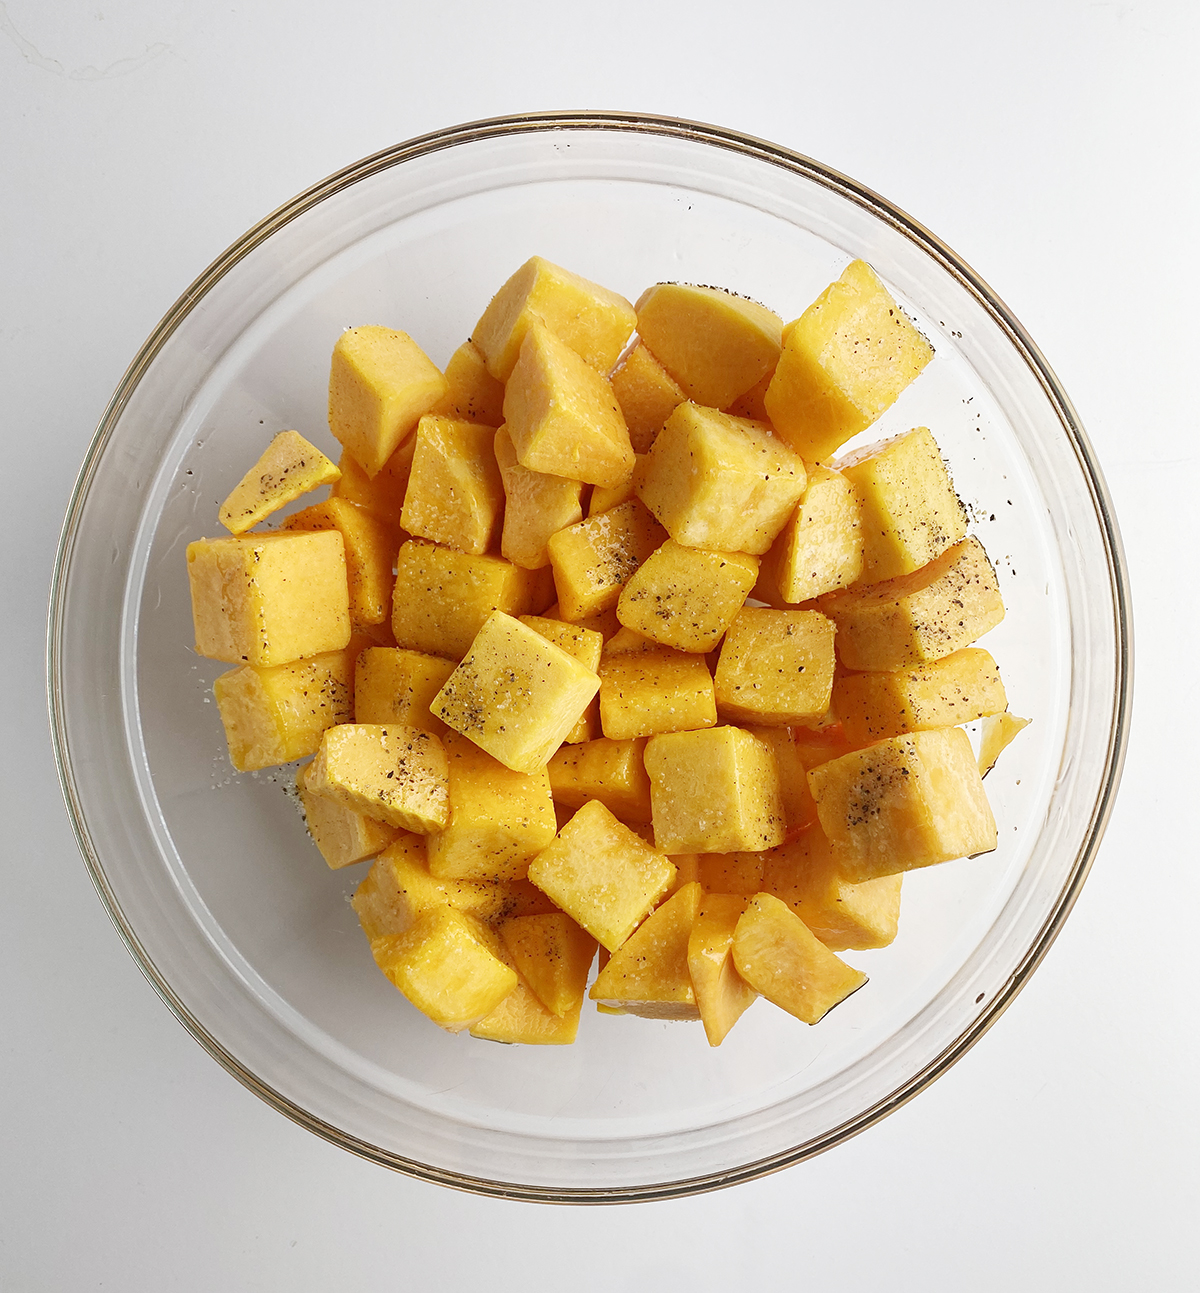 butternut squash cubes in bowl tossed with olive oil and pepper.